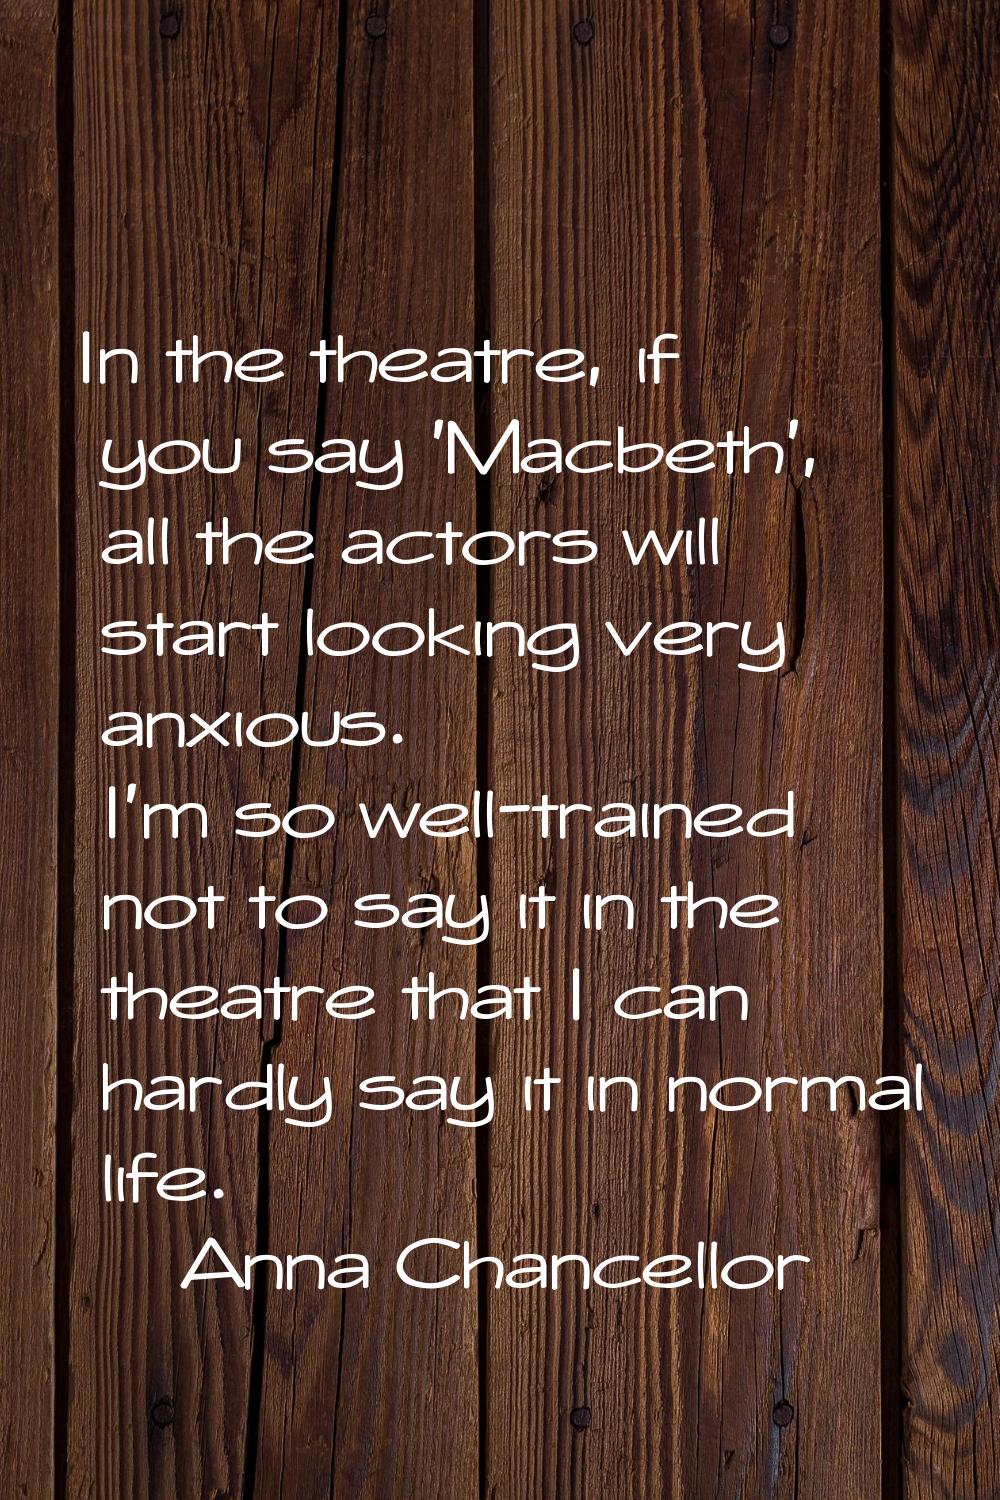 In the theatre, if you say 'Macbeth', all the actors will start looking very anxious. I'm so well-t